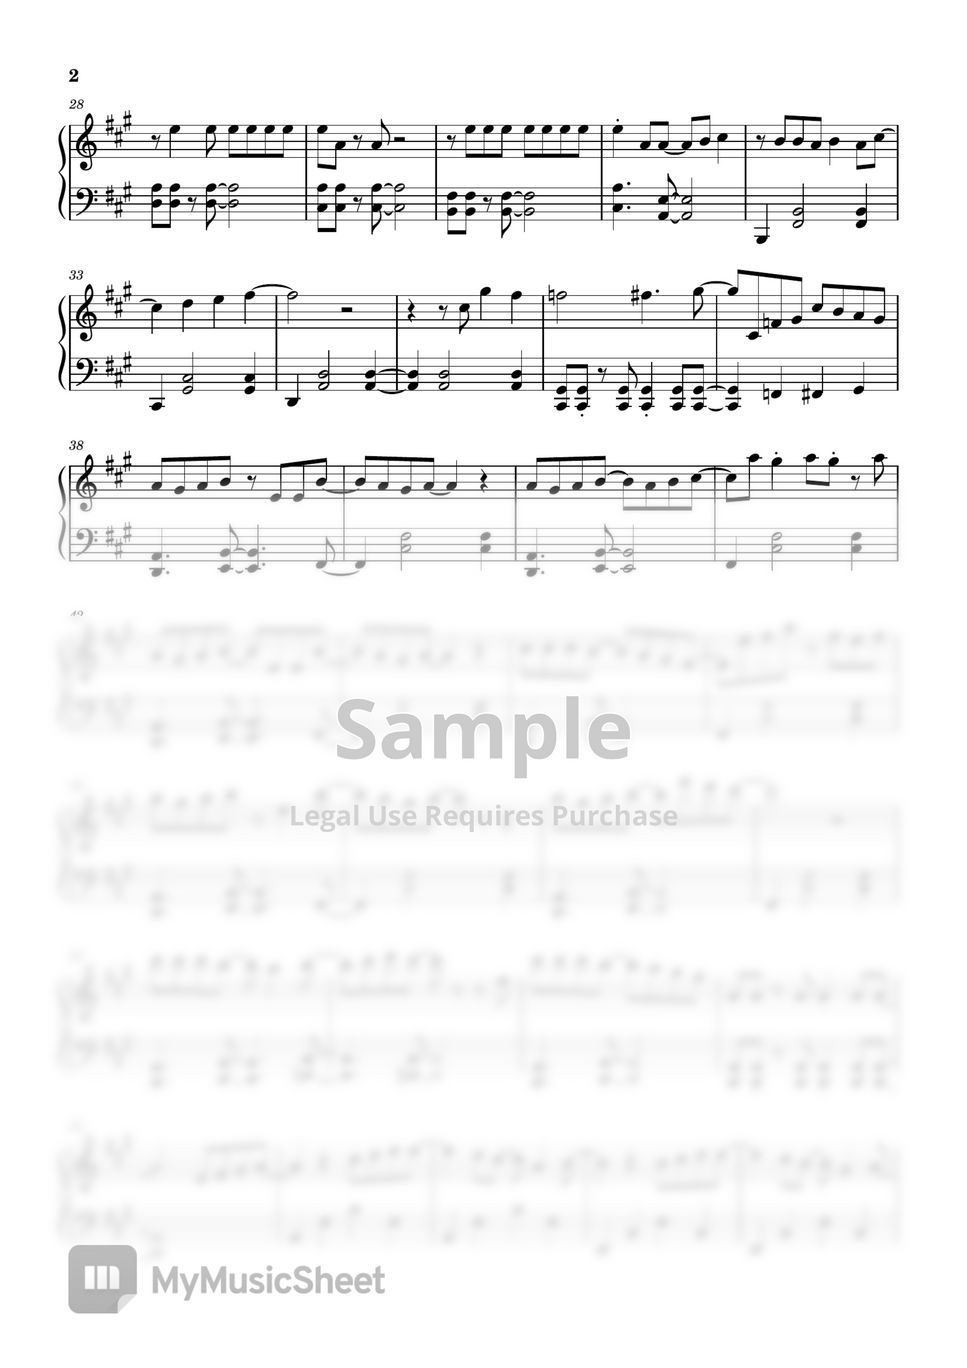 Hikaru Nara (Your Lie in April OP 1) Sheet music for Piano (Solo)